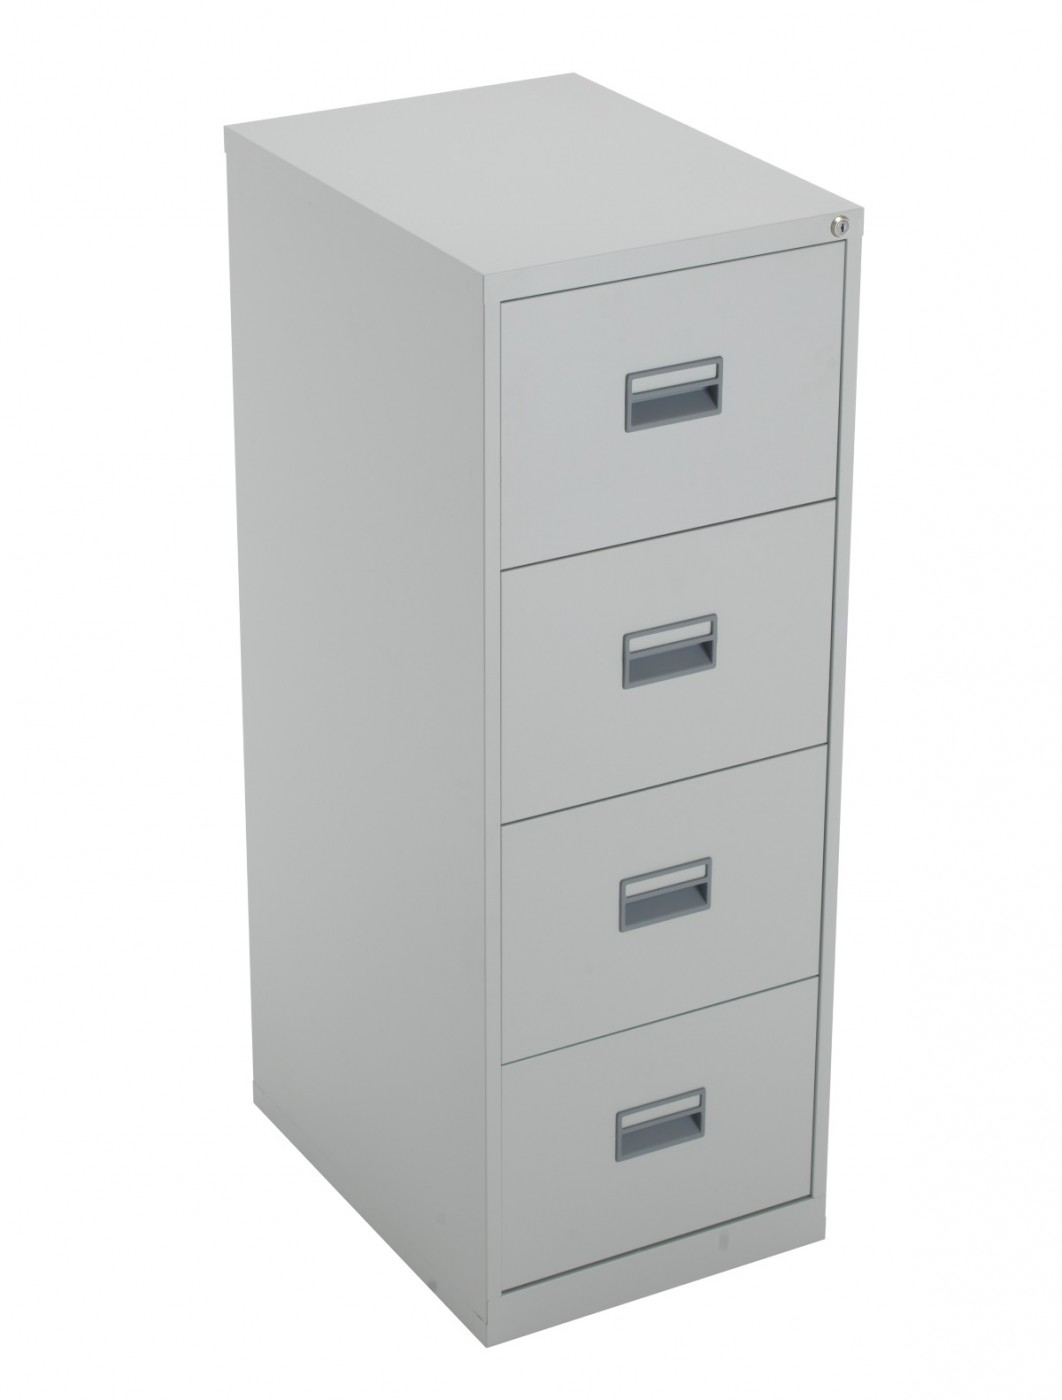 Tc Talos 4 Drawer Steel Filing Cabinet Tcs4fc Gr In Grey 121 throughout sizing 1062 X 1400